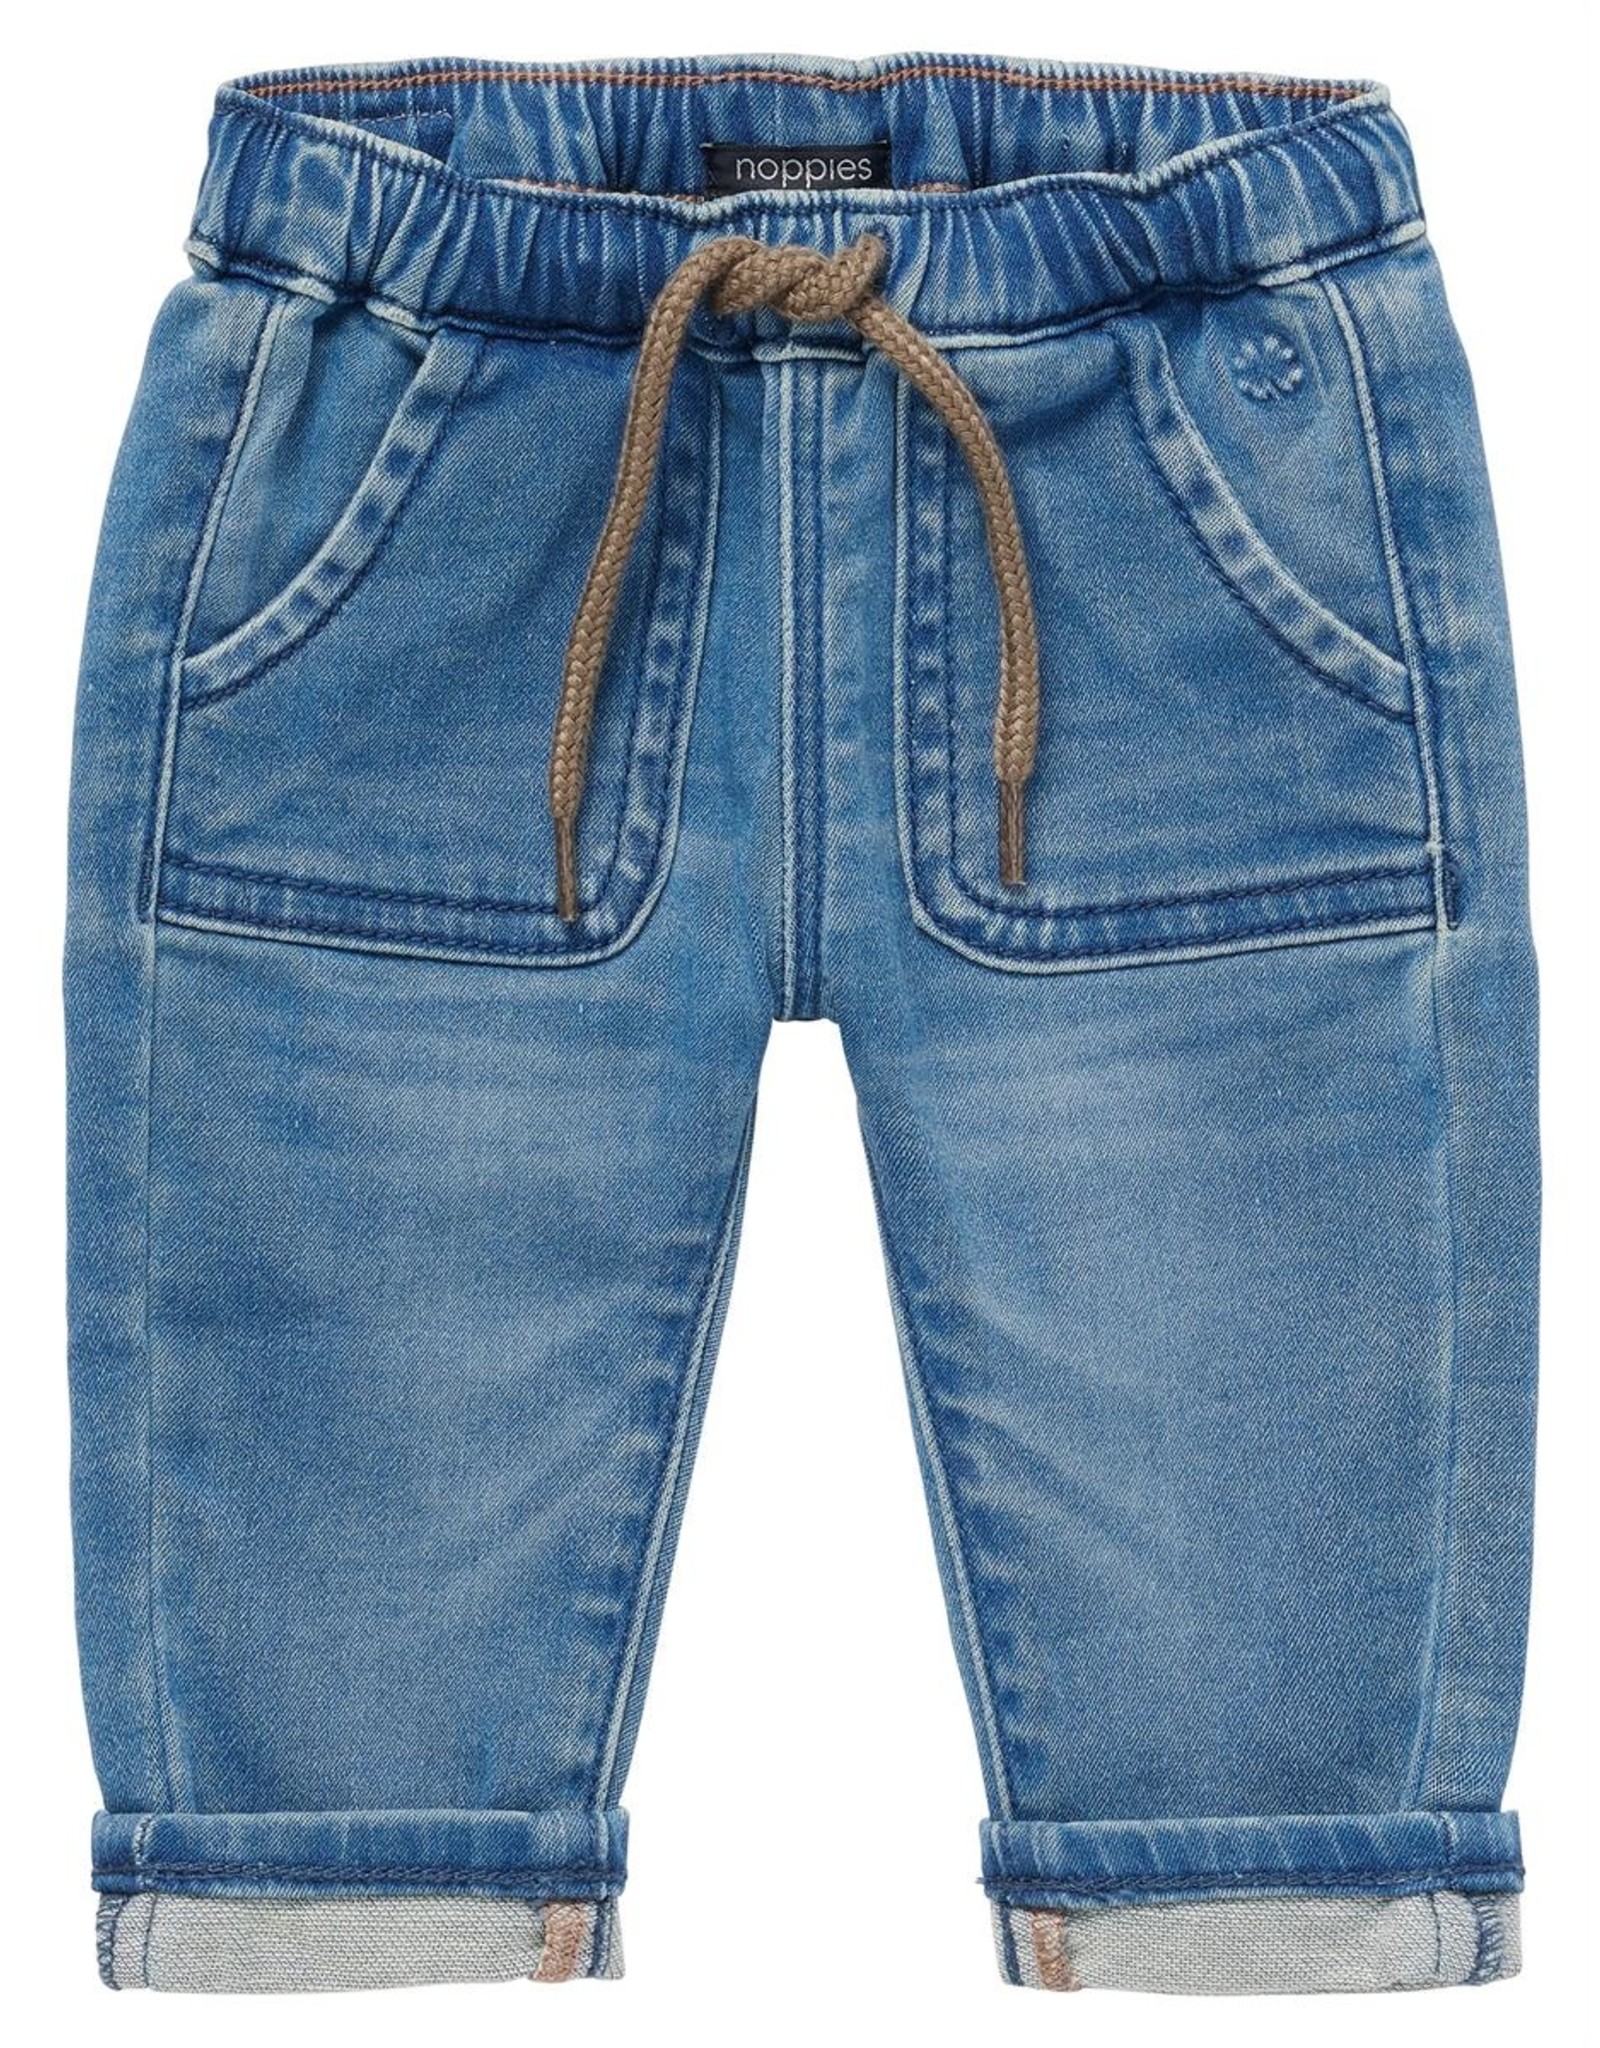 Noppies Noppies Boys  Pants Jelsi Relaxed Fit Light Blue Denim